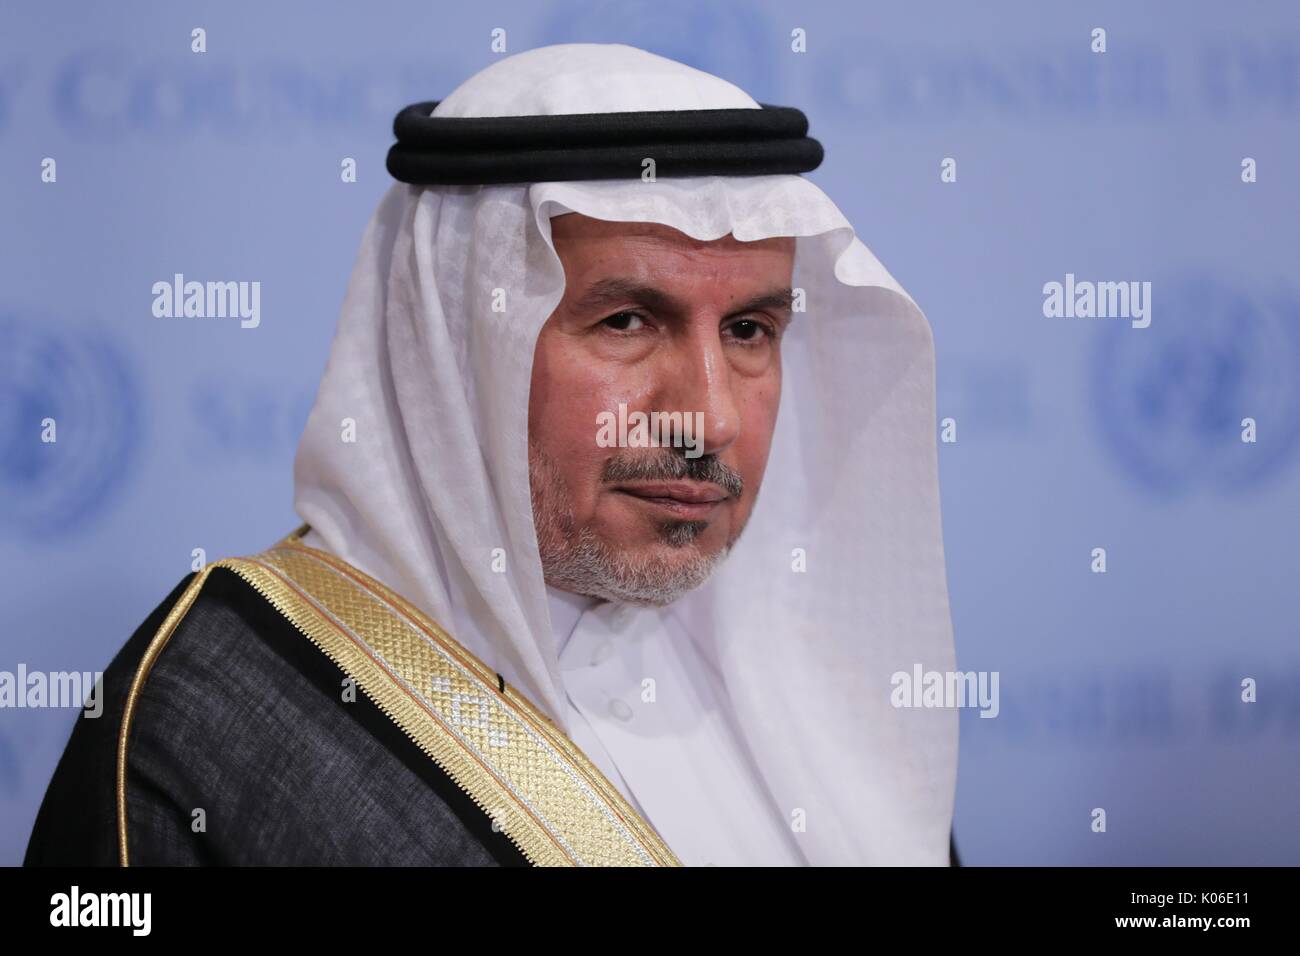 United Nations, New York, USA, August 21 2017 - Abdullah bin Abdulaziz Al Rabeeah, General Supervisor of the King Salman Centre for Relief and Humanitarian Affairs of Saudi Arabia, briefs journalists on the humanitarian situation in Yemen. Joining him in in addressing reporters was Abdallah Yahya A. Al-Mouallimi, Permanent Representative of Saudi Arabia to the UN today at the UN Headquarters in New York City. Photo: Luiz Rampelotto/EuropaNewswire | usage worldwide Stock Photo